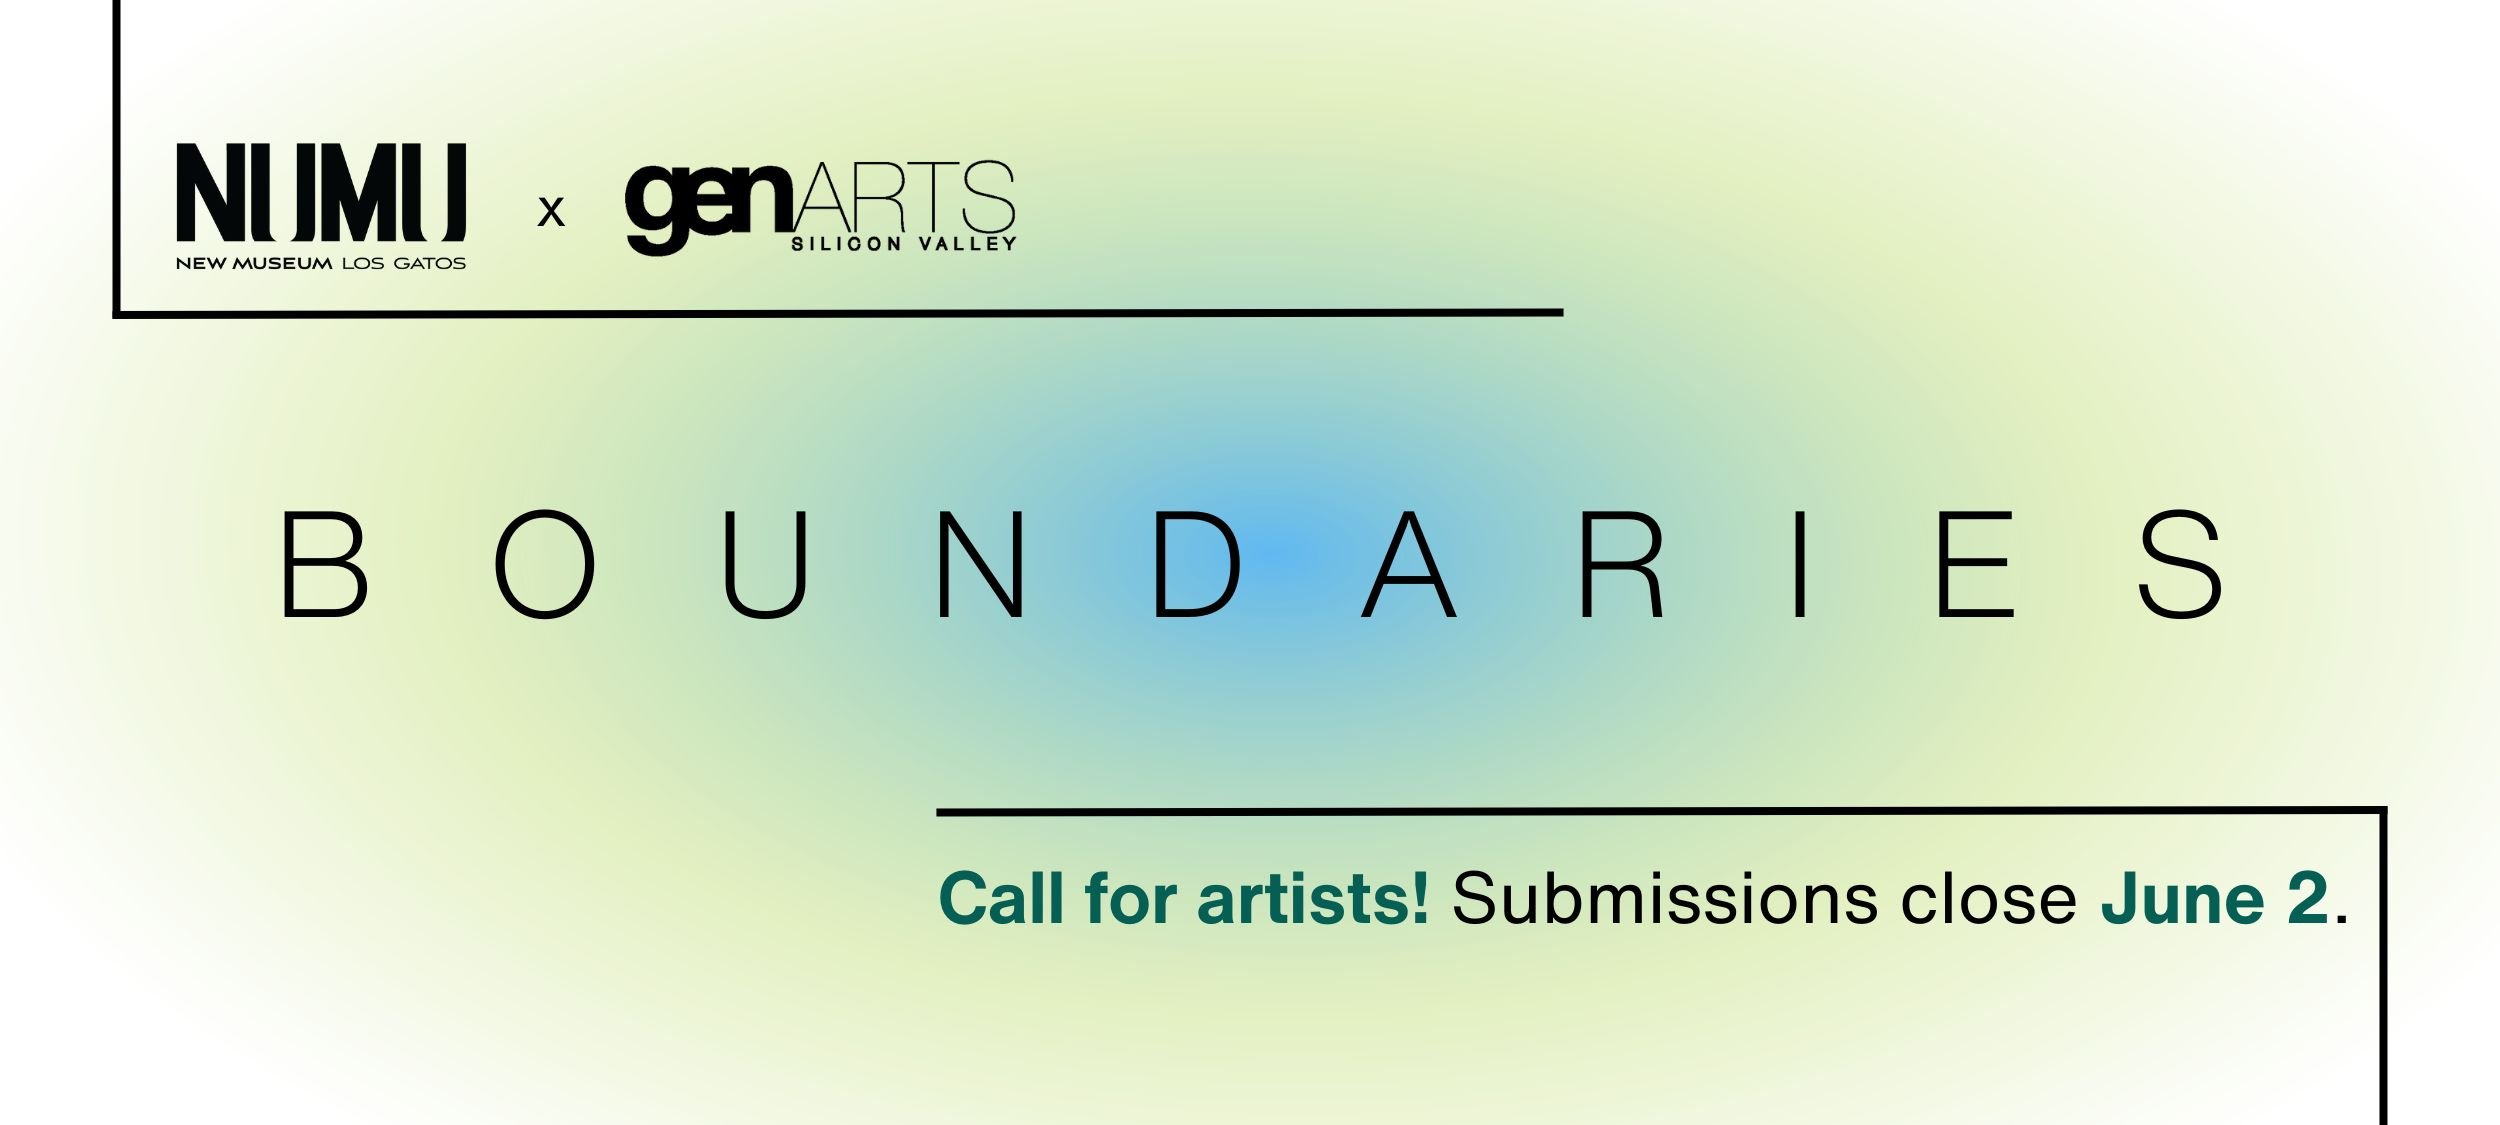 NUMU x genARTS, Boundaries, Call for artists, Submissions open through June 2